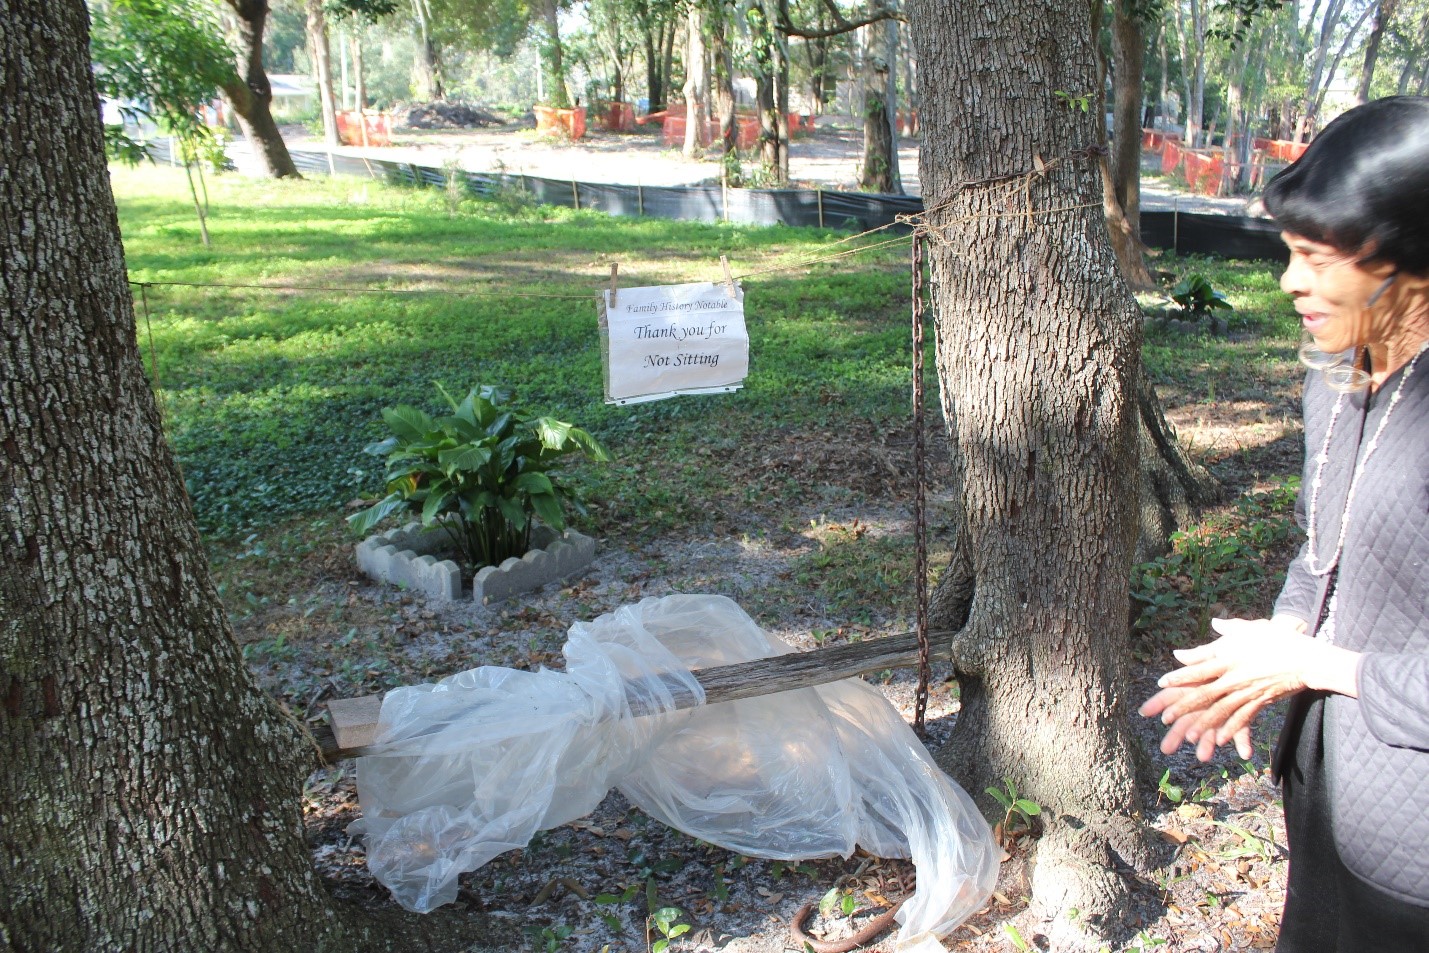 Mrs. Franklin points out a simple wooden board suspended between two trees, covered in plastic wrap and marked with a sign reading, "Thank you for Not Sitting."